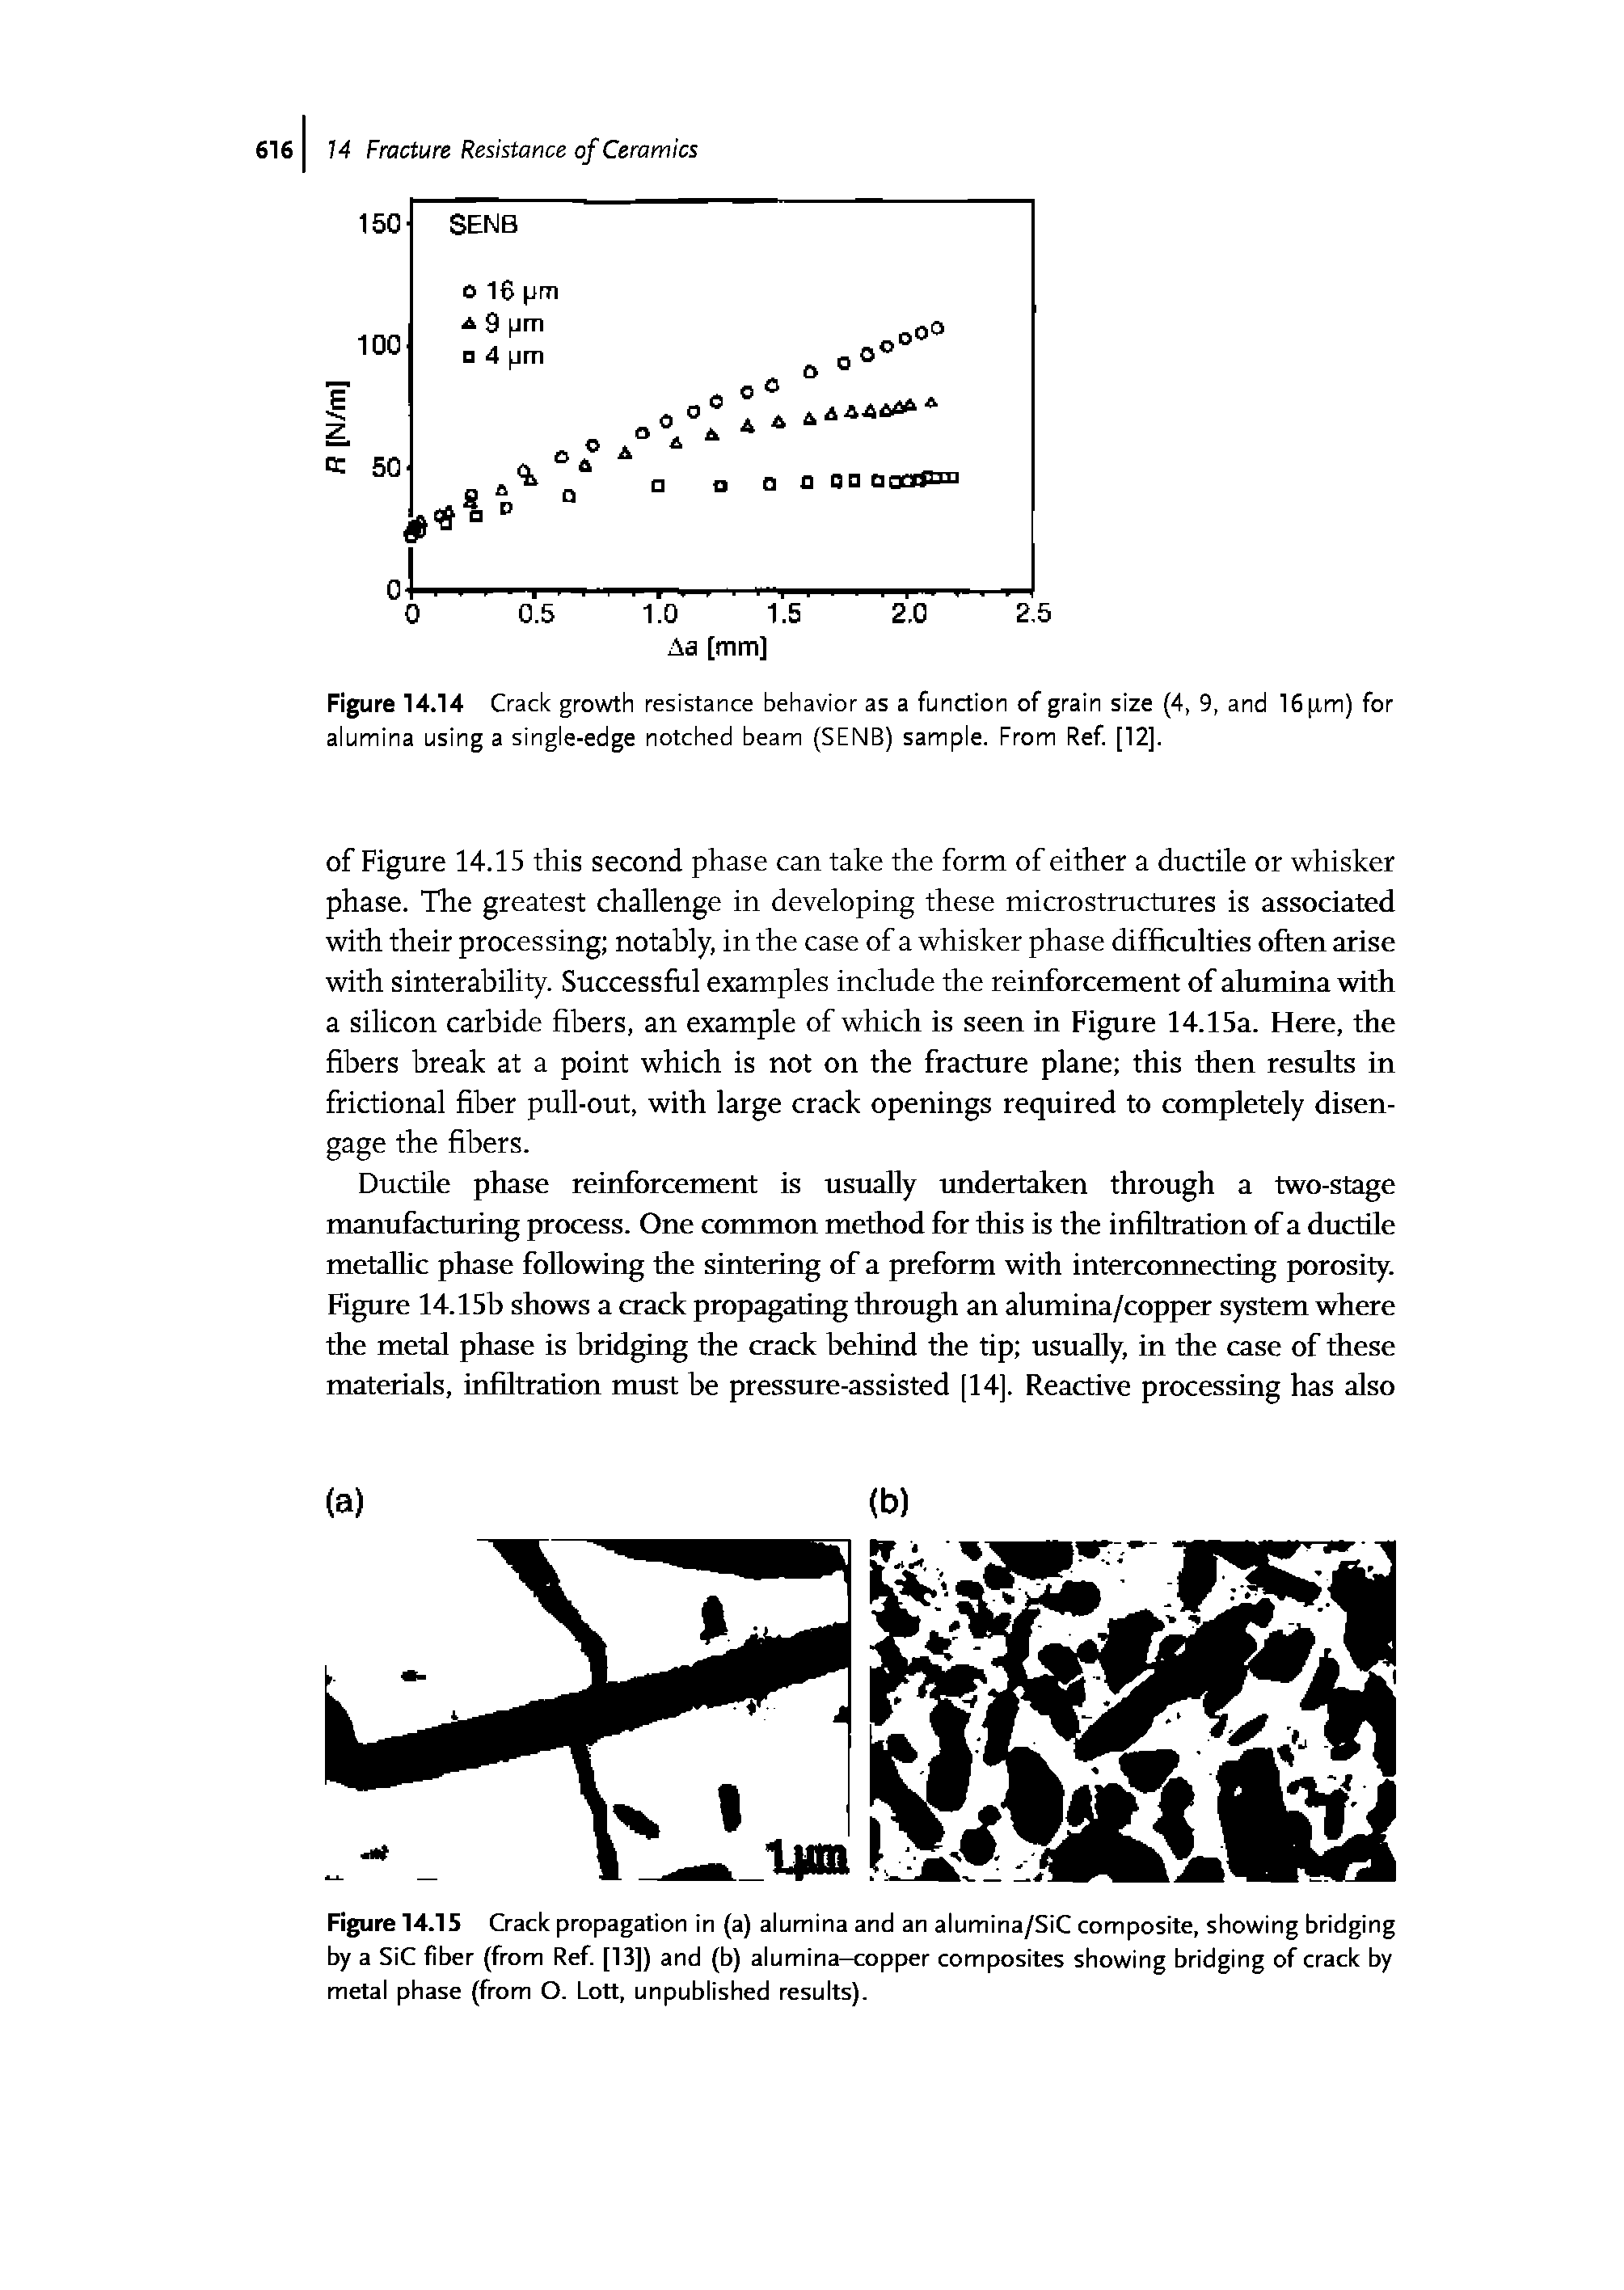 Figure 14.14 Crack growth resistance behavior as a function of grain size (4, 9, and 16nm) for alumina using a single-edge notched beam (SENB) sample. From Ref [12].